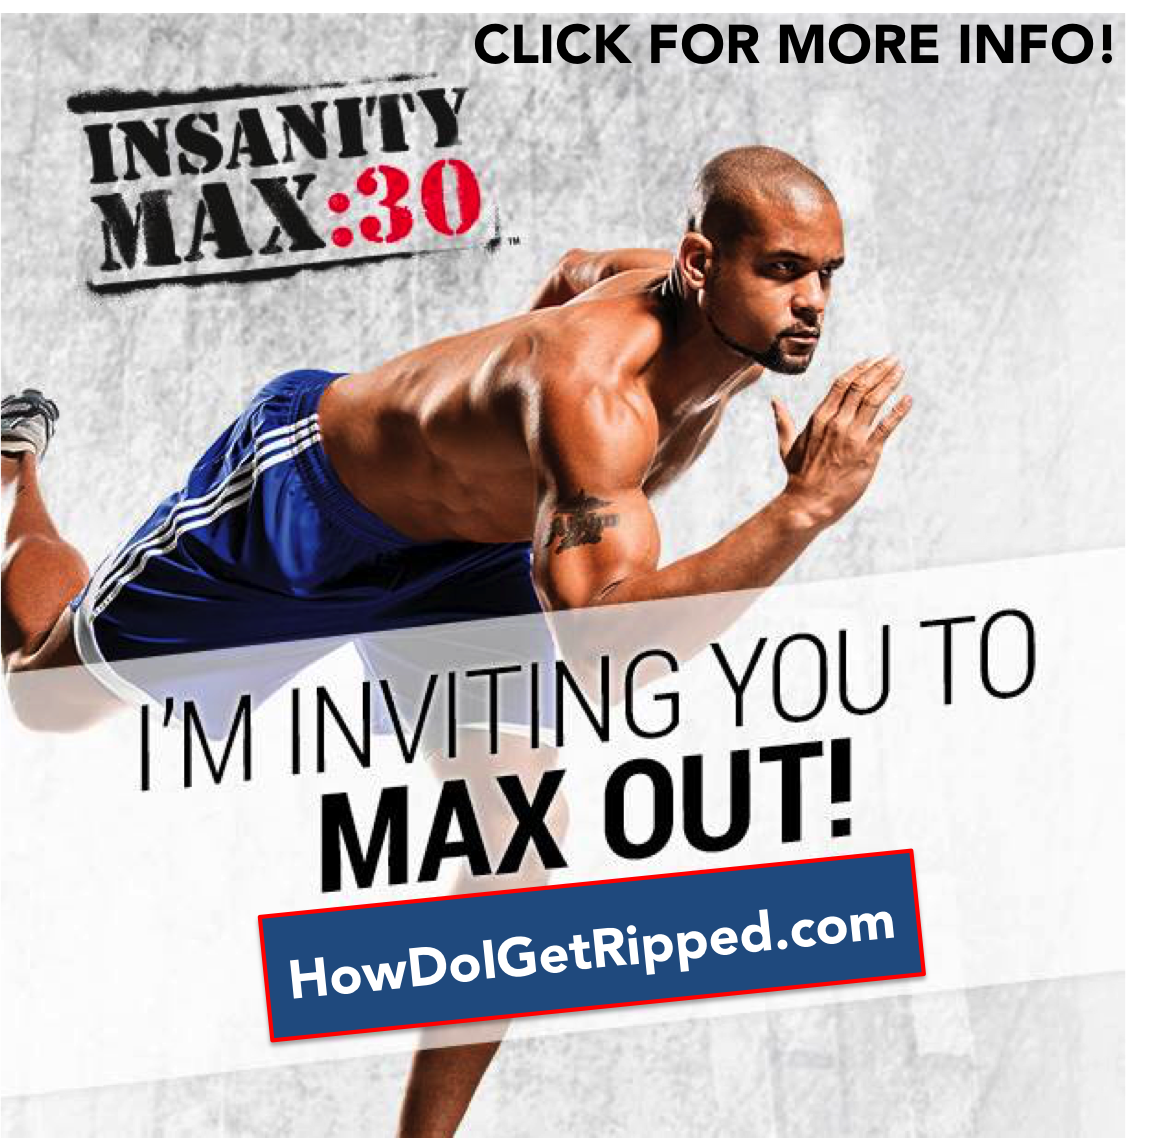 Insanity Max 30 Work Workout Reviews